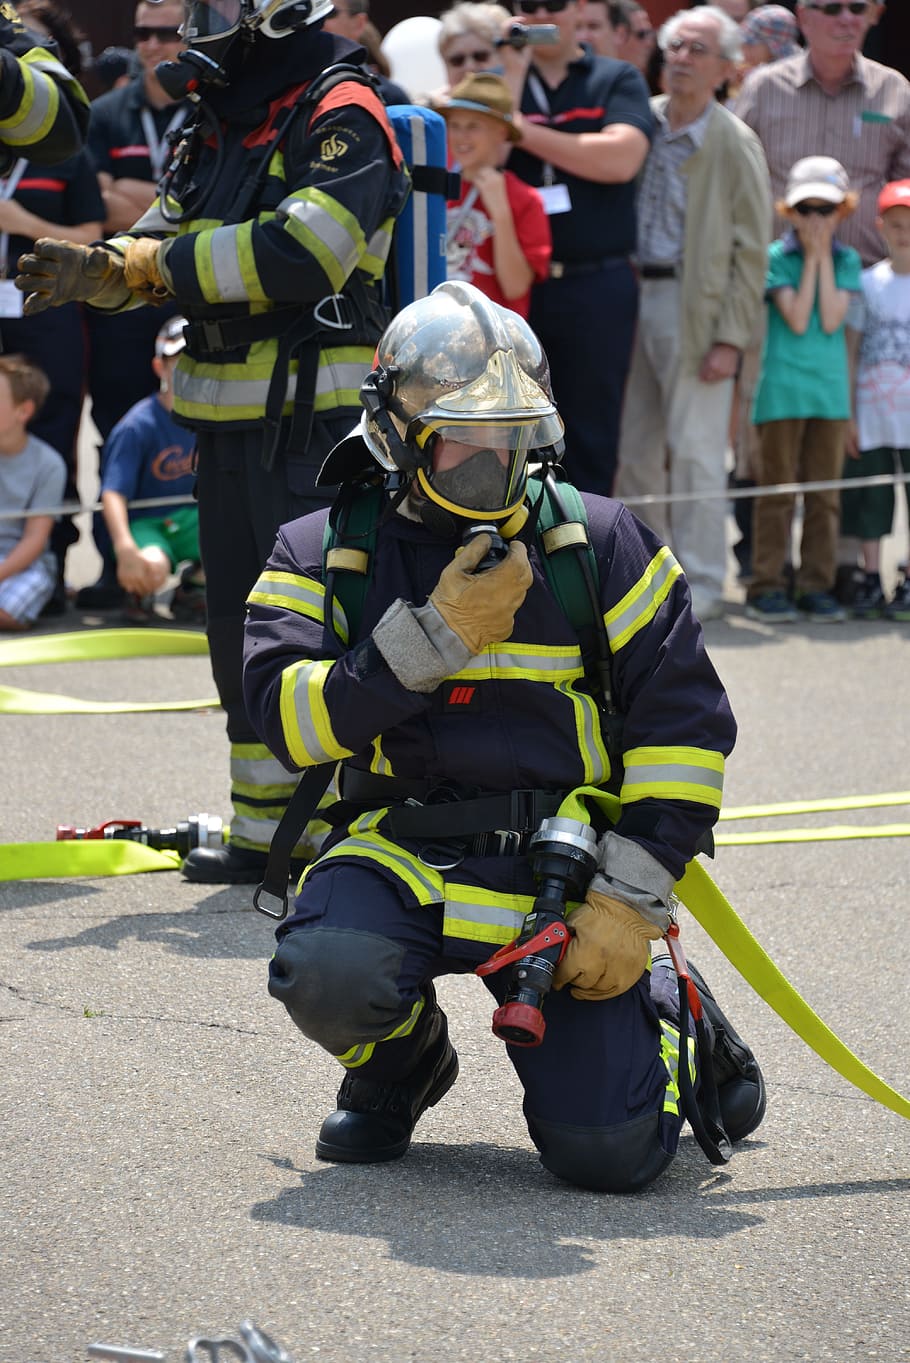 fire fighter, fire, Fire Fighter, fire, respiratory protection, feuerloeschuebung, firefighters, delete, breathing apparatus, use, delete exercise